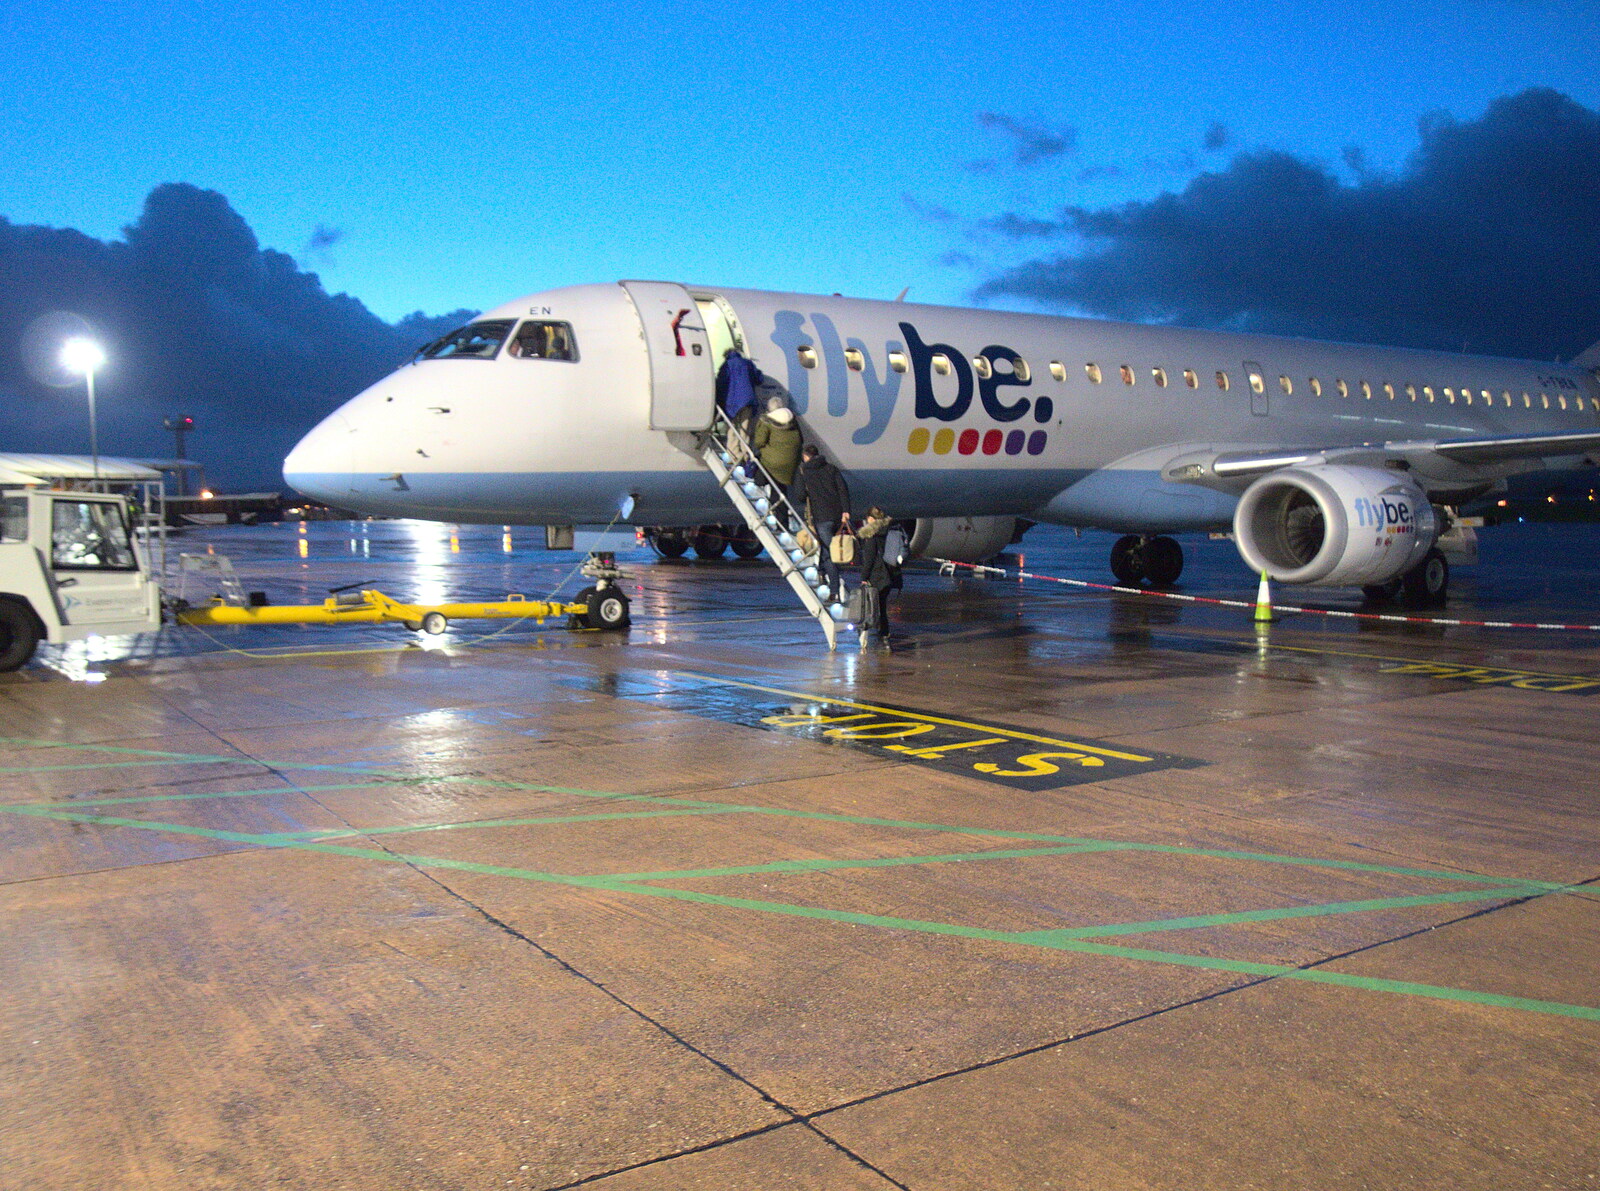 Passengers load up on the FlyBe Embraer from New Year's Eve in Spreyton, Devon - 31st December 2017